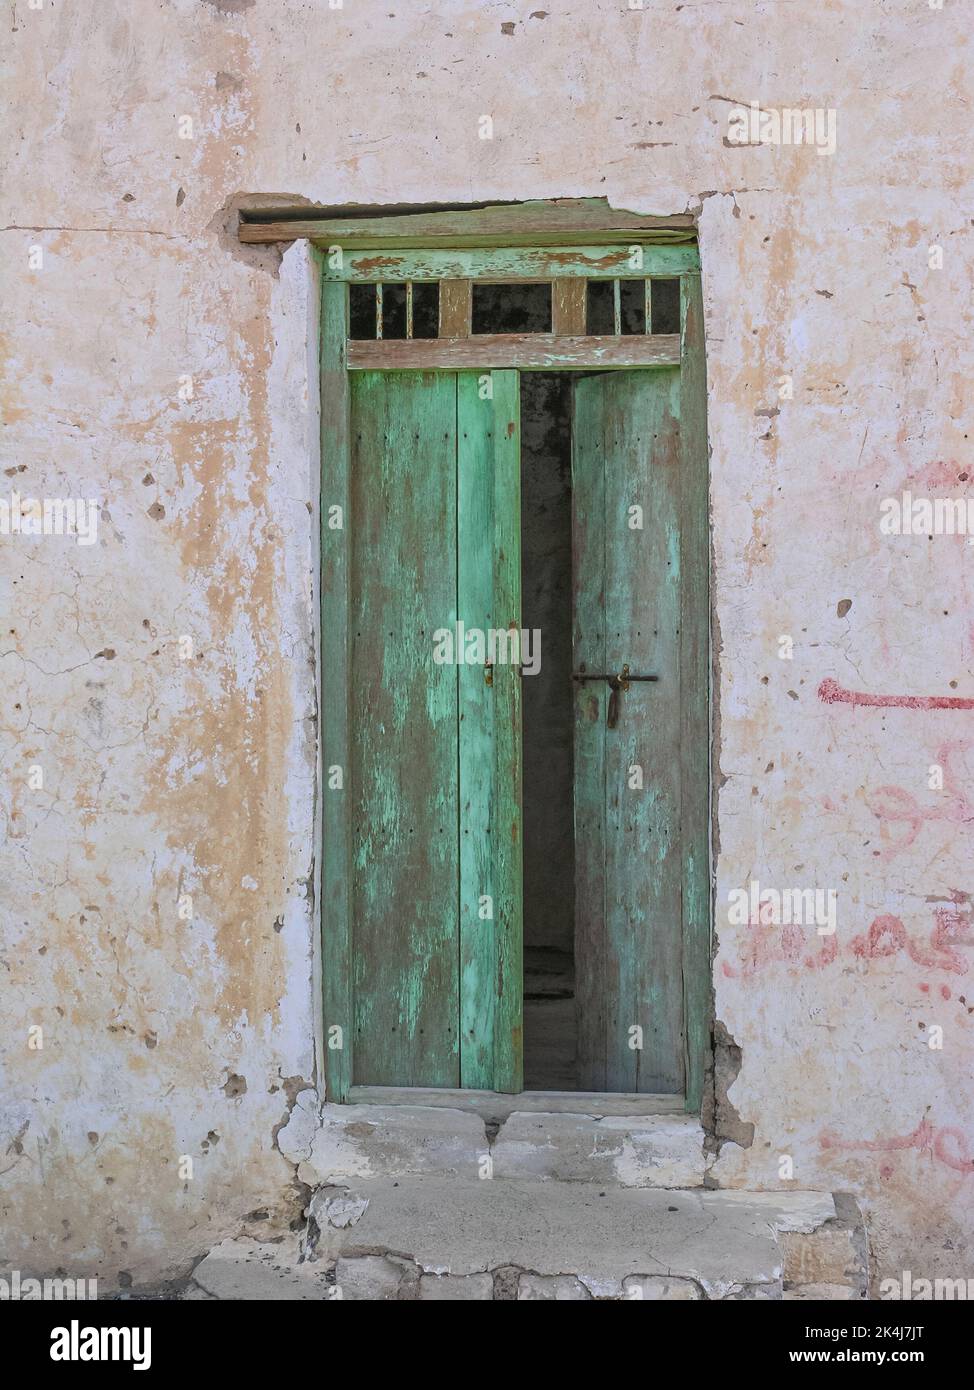 The entrance to an old dilapidated canteen in Tawi Fili in the emirate of Sharjah in the United Arab Emirates. Stock Photo